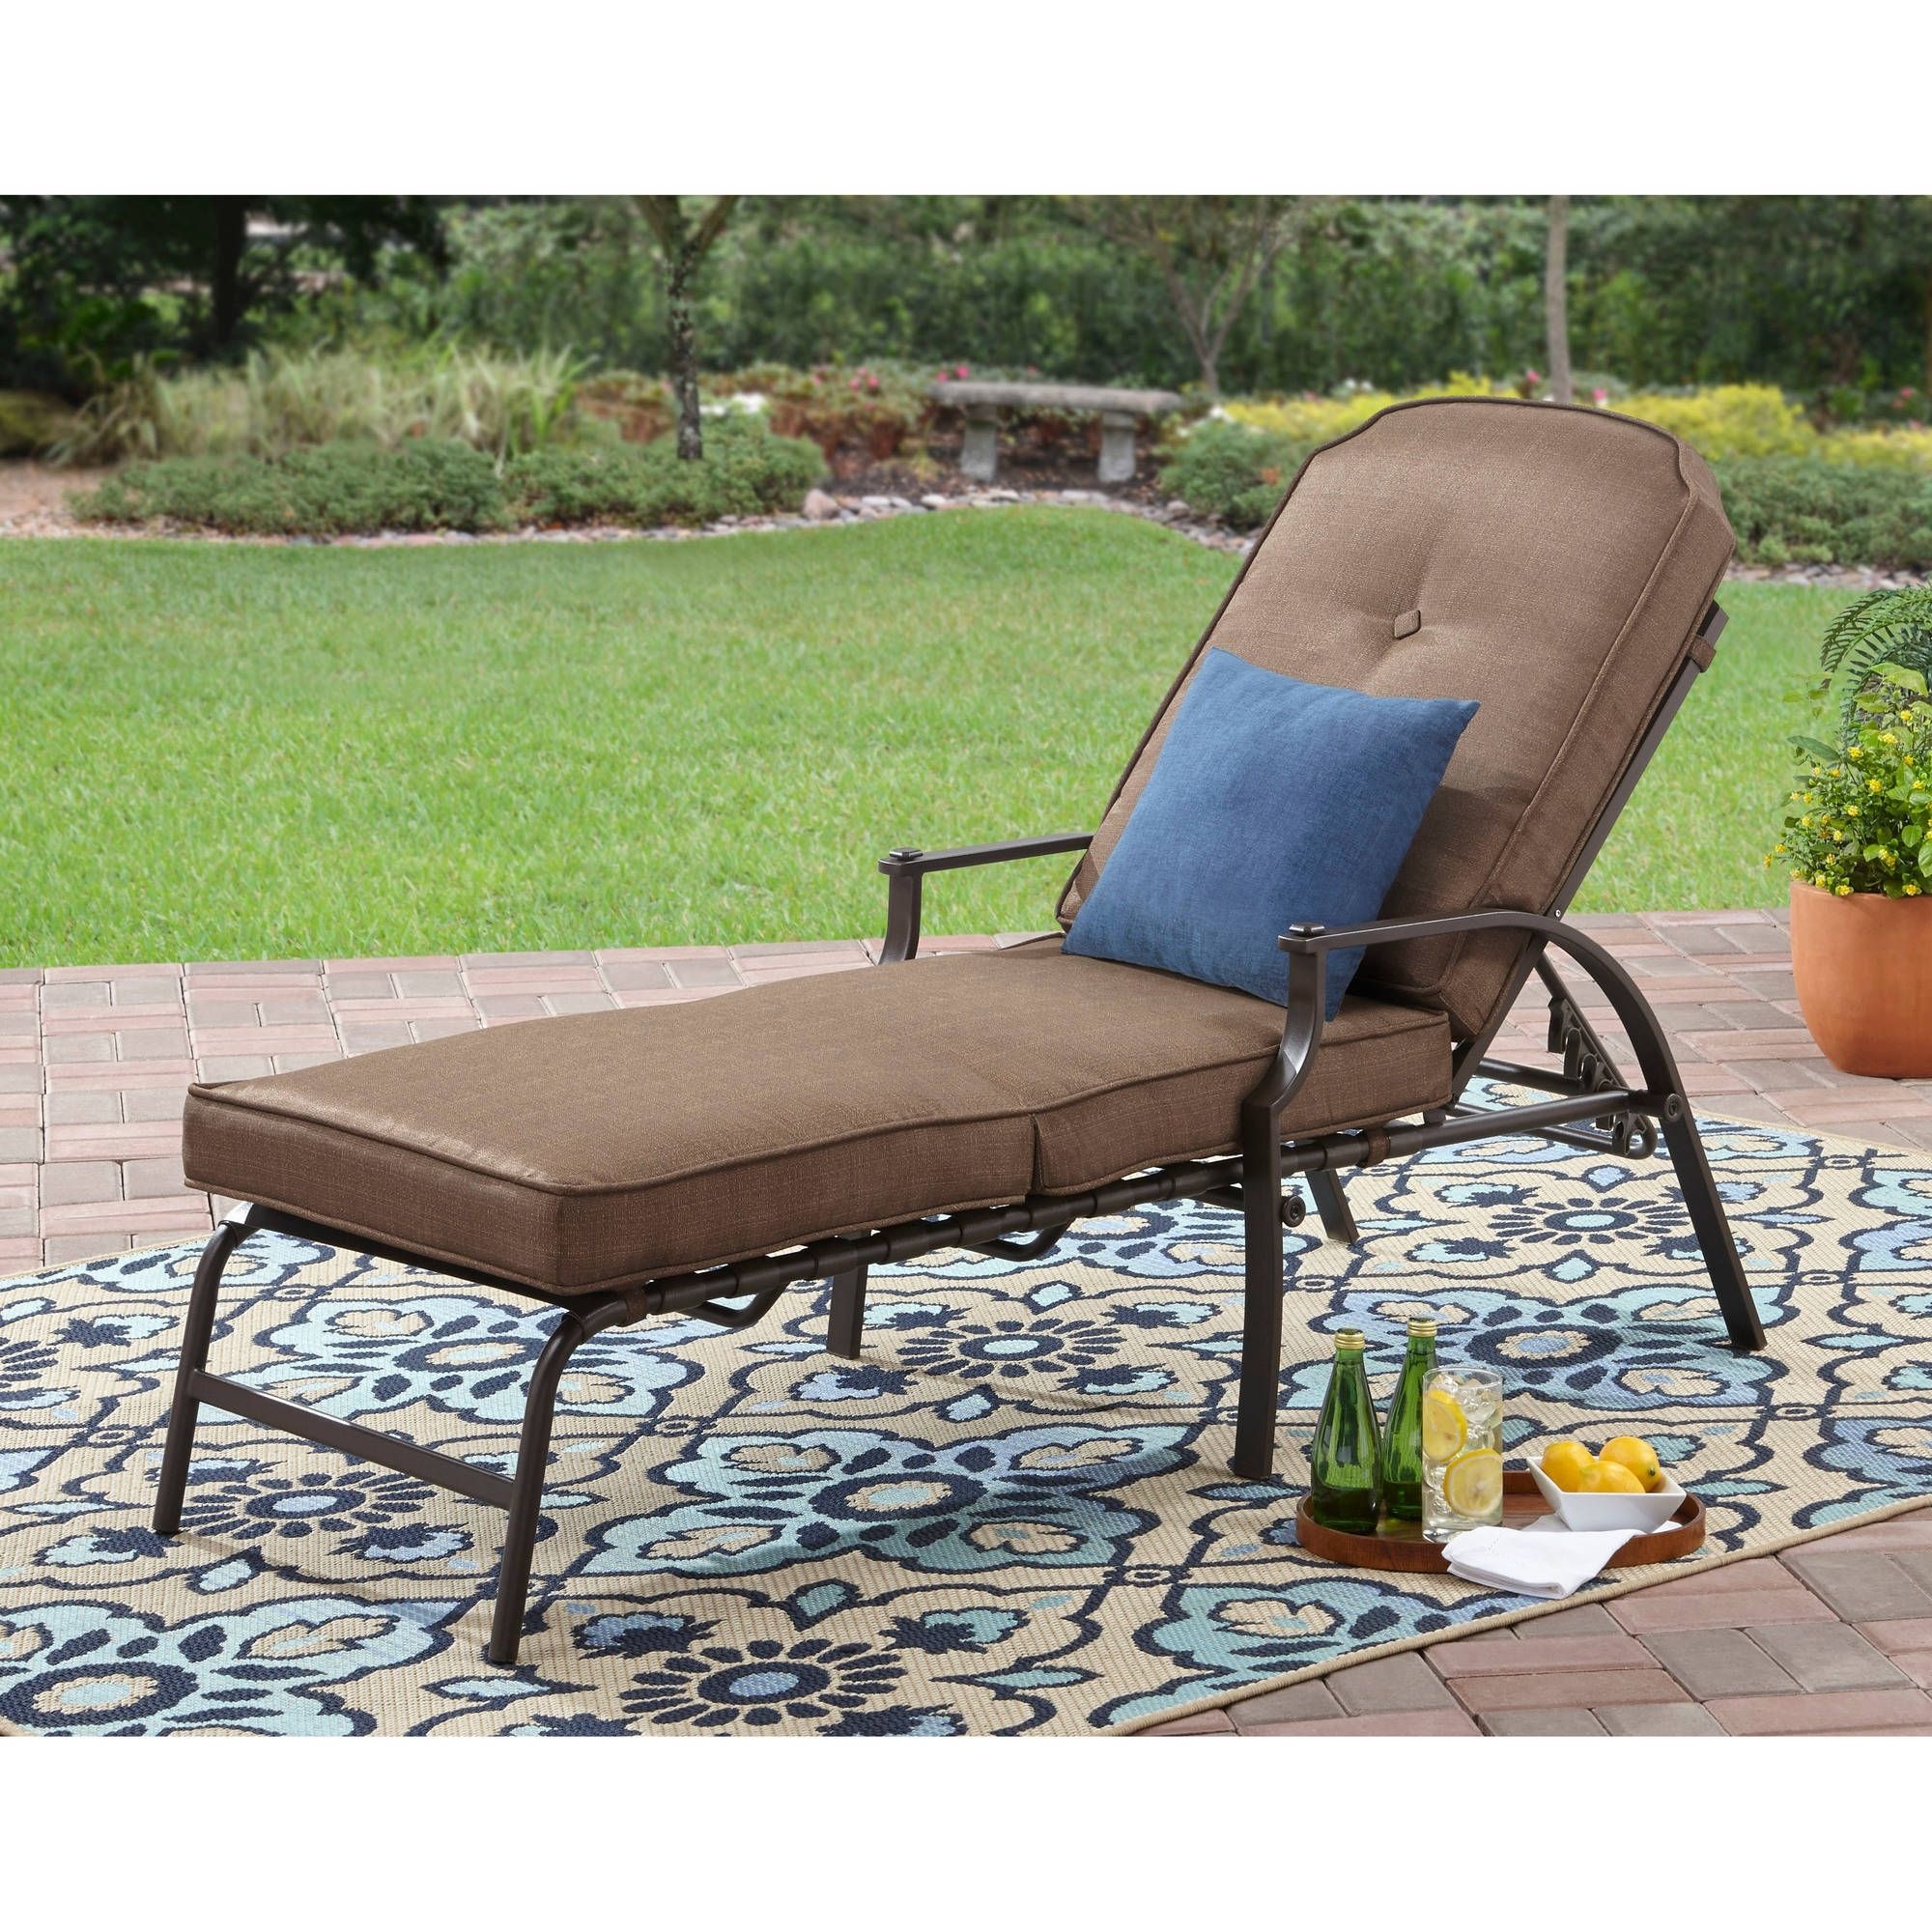 Newest Walmart Chaise Lounge Chairs With Regard To Mainstays Wentworth Chaise Lounge – Walmart (View 12 of 15)